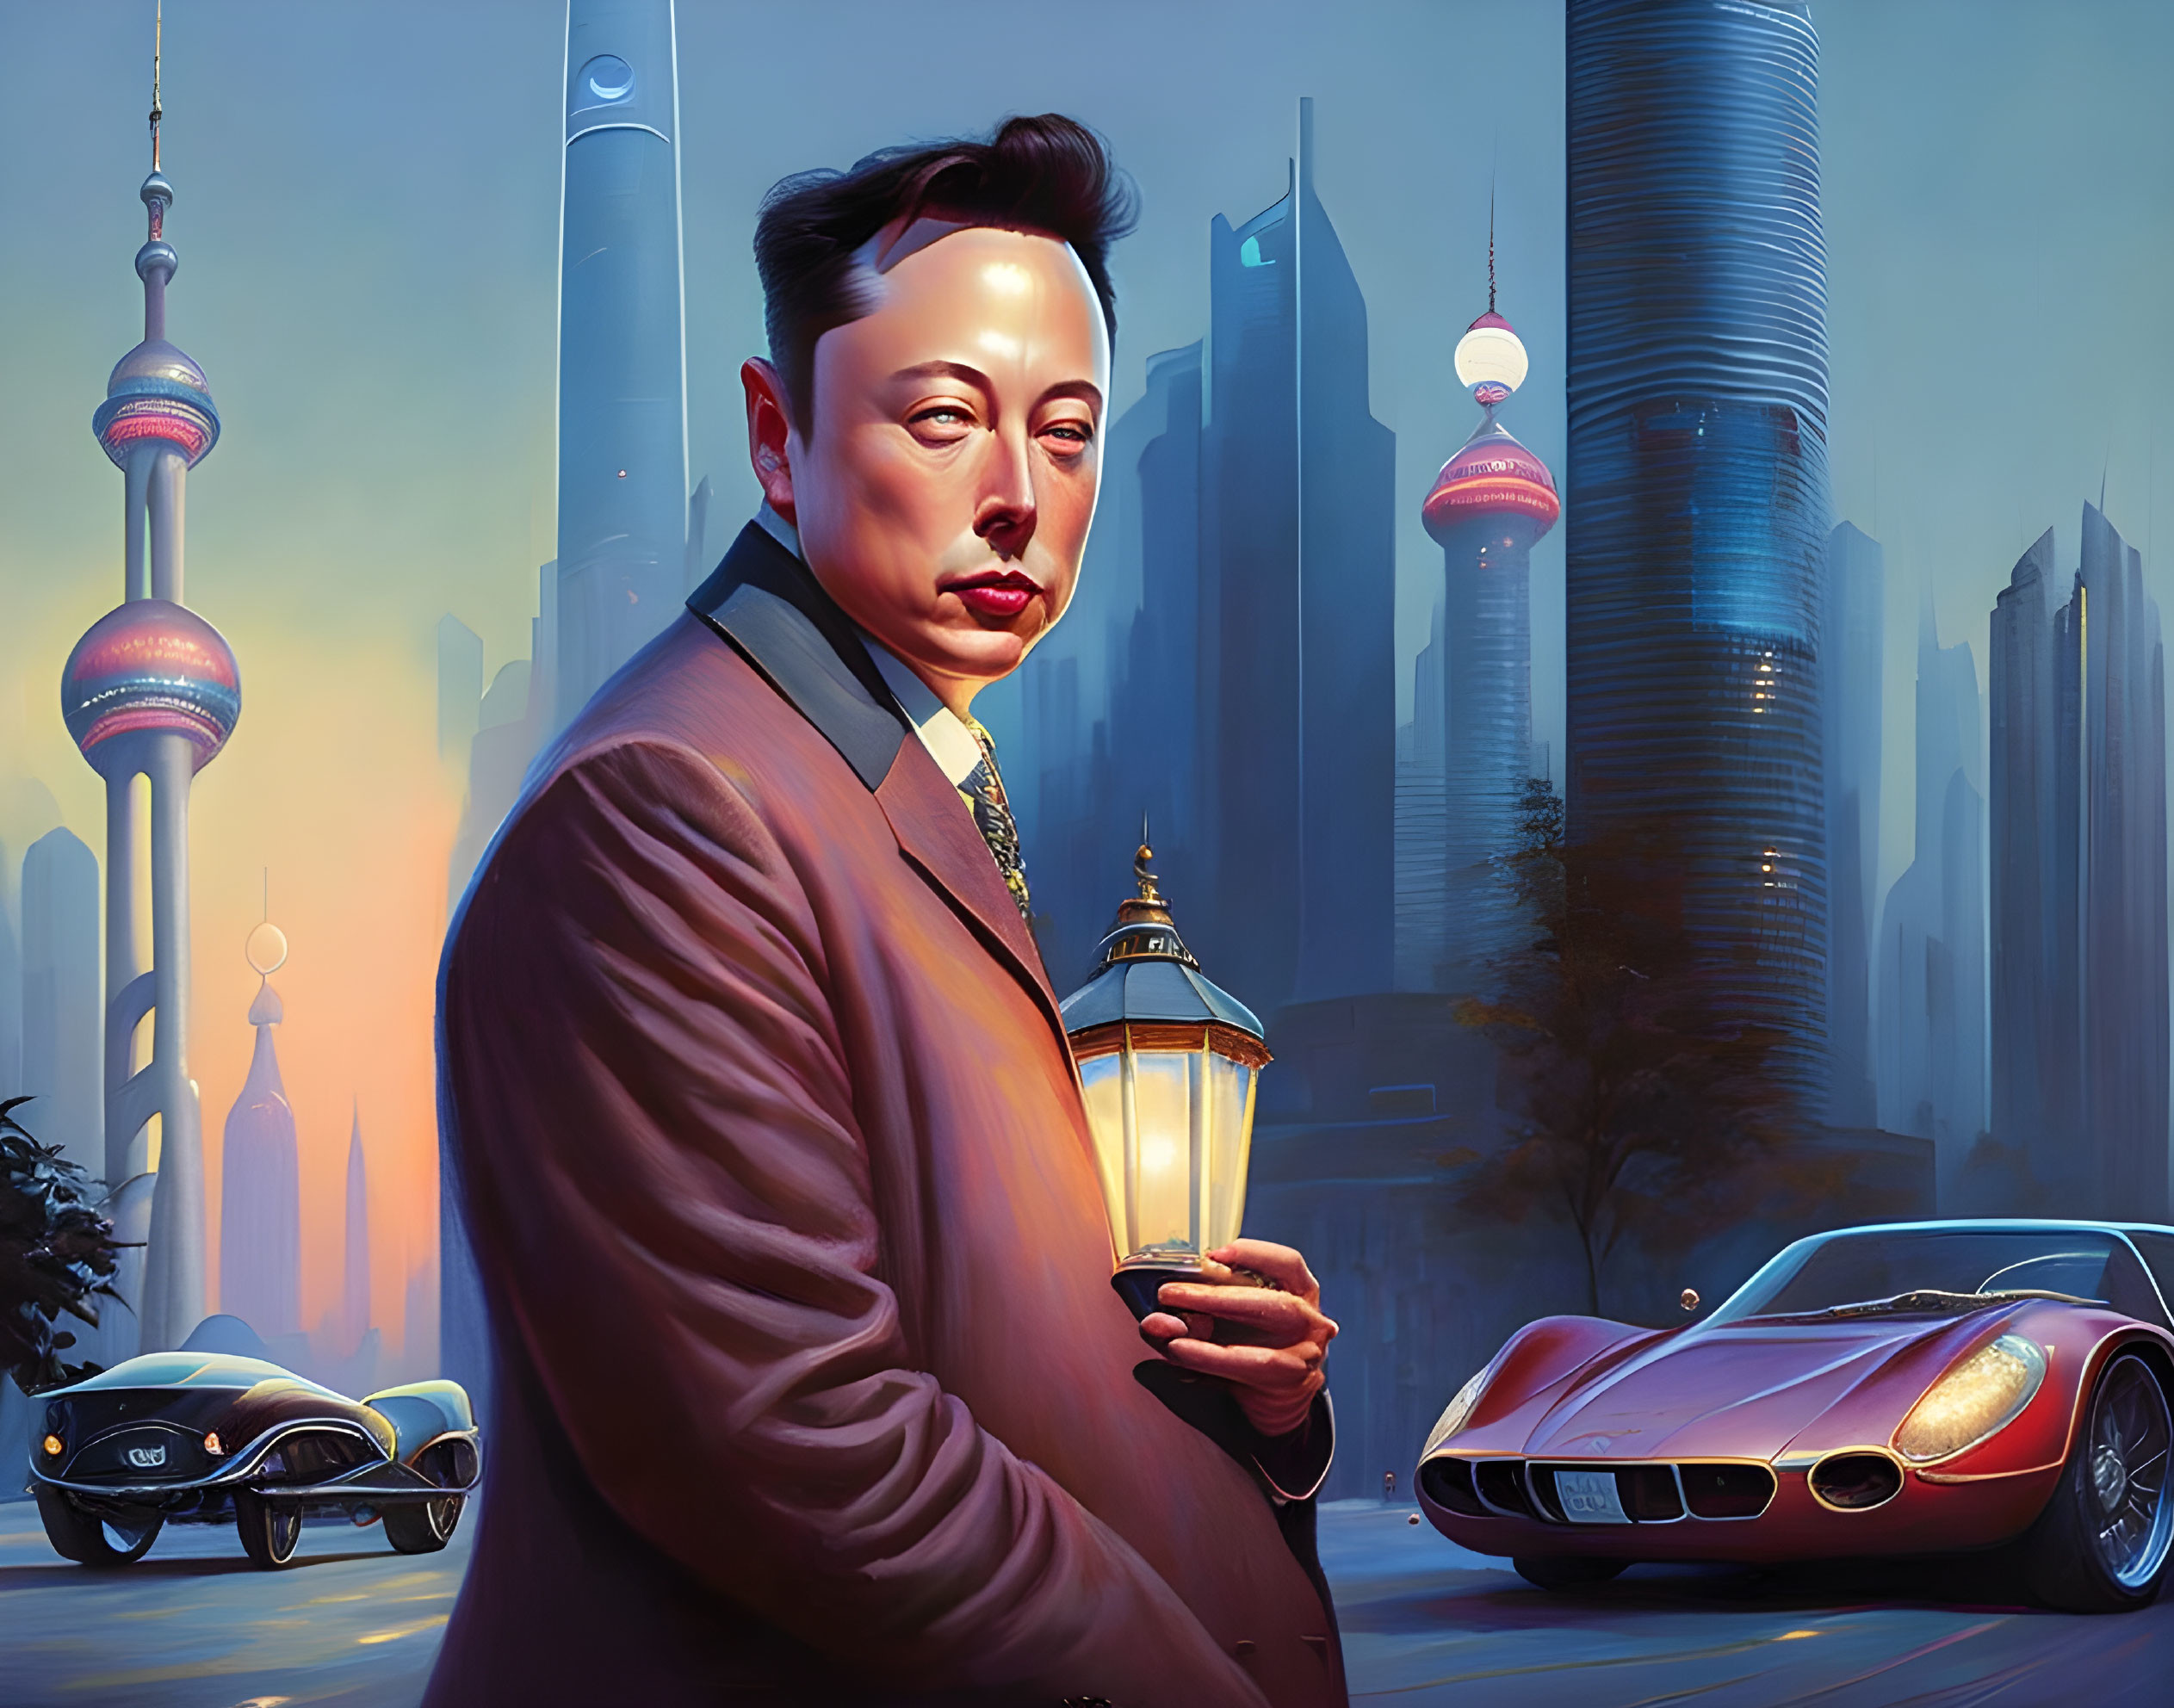 Man with lantern in front of futuristic cityscape and vintage cars